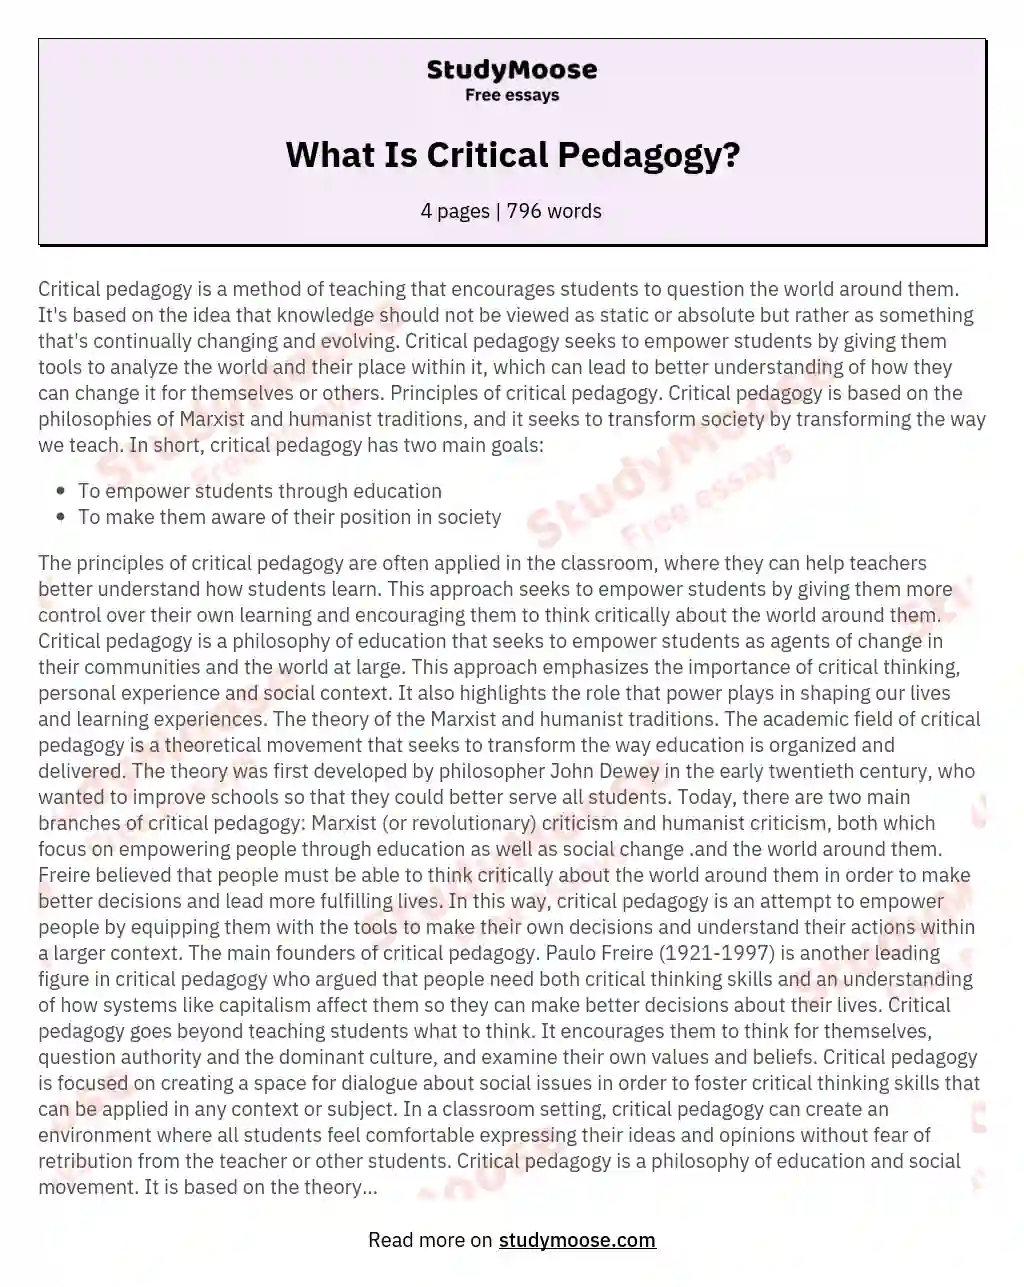 What Is Critical Pedagogy? essay